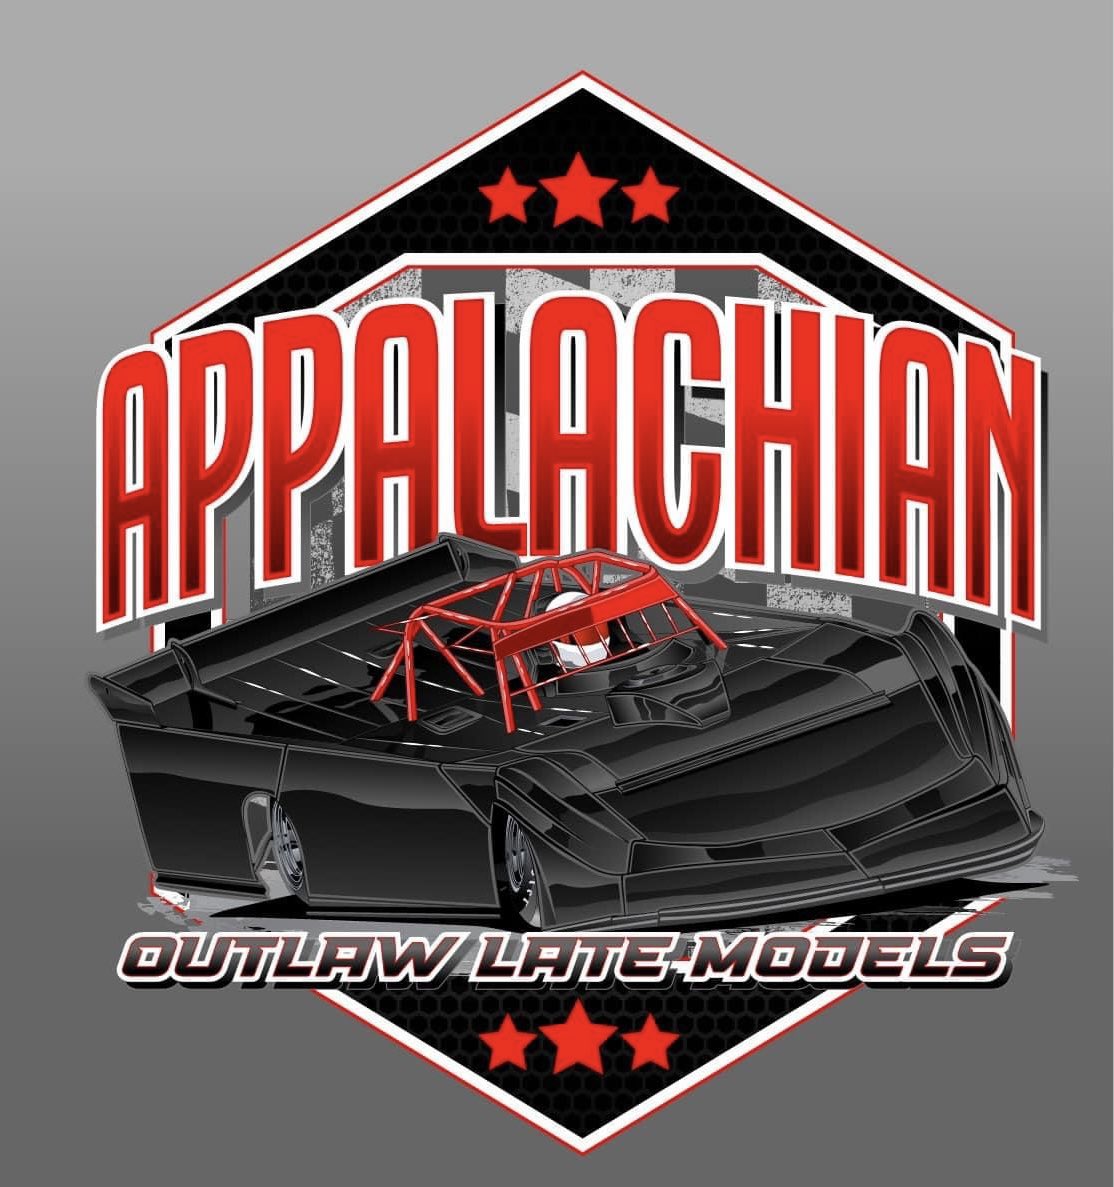 ‼️𝘽𝙍𝙀𝘼𝙆𝙄𝙉𝙂 𝙉𝙀𝙒𝙎‼️

Appalachian Outlaw Late Models are set to debut in Tennessee and Kentucky! 

Plans to start another series, in addition to the Blue Ridge Outlaw Late Models in 2024!

#BlueRidgeOutlaws | #ShortTrackSaturdayNight | @ThePostman68 | @DunewichOnDirt